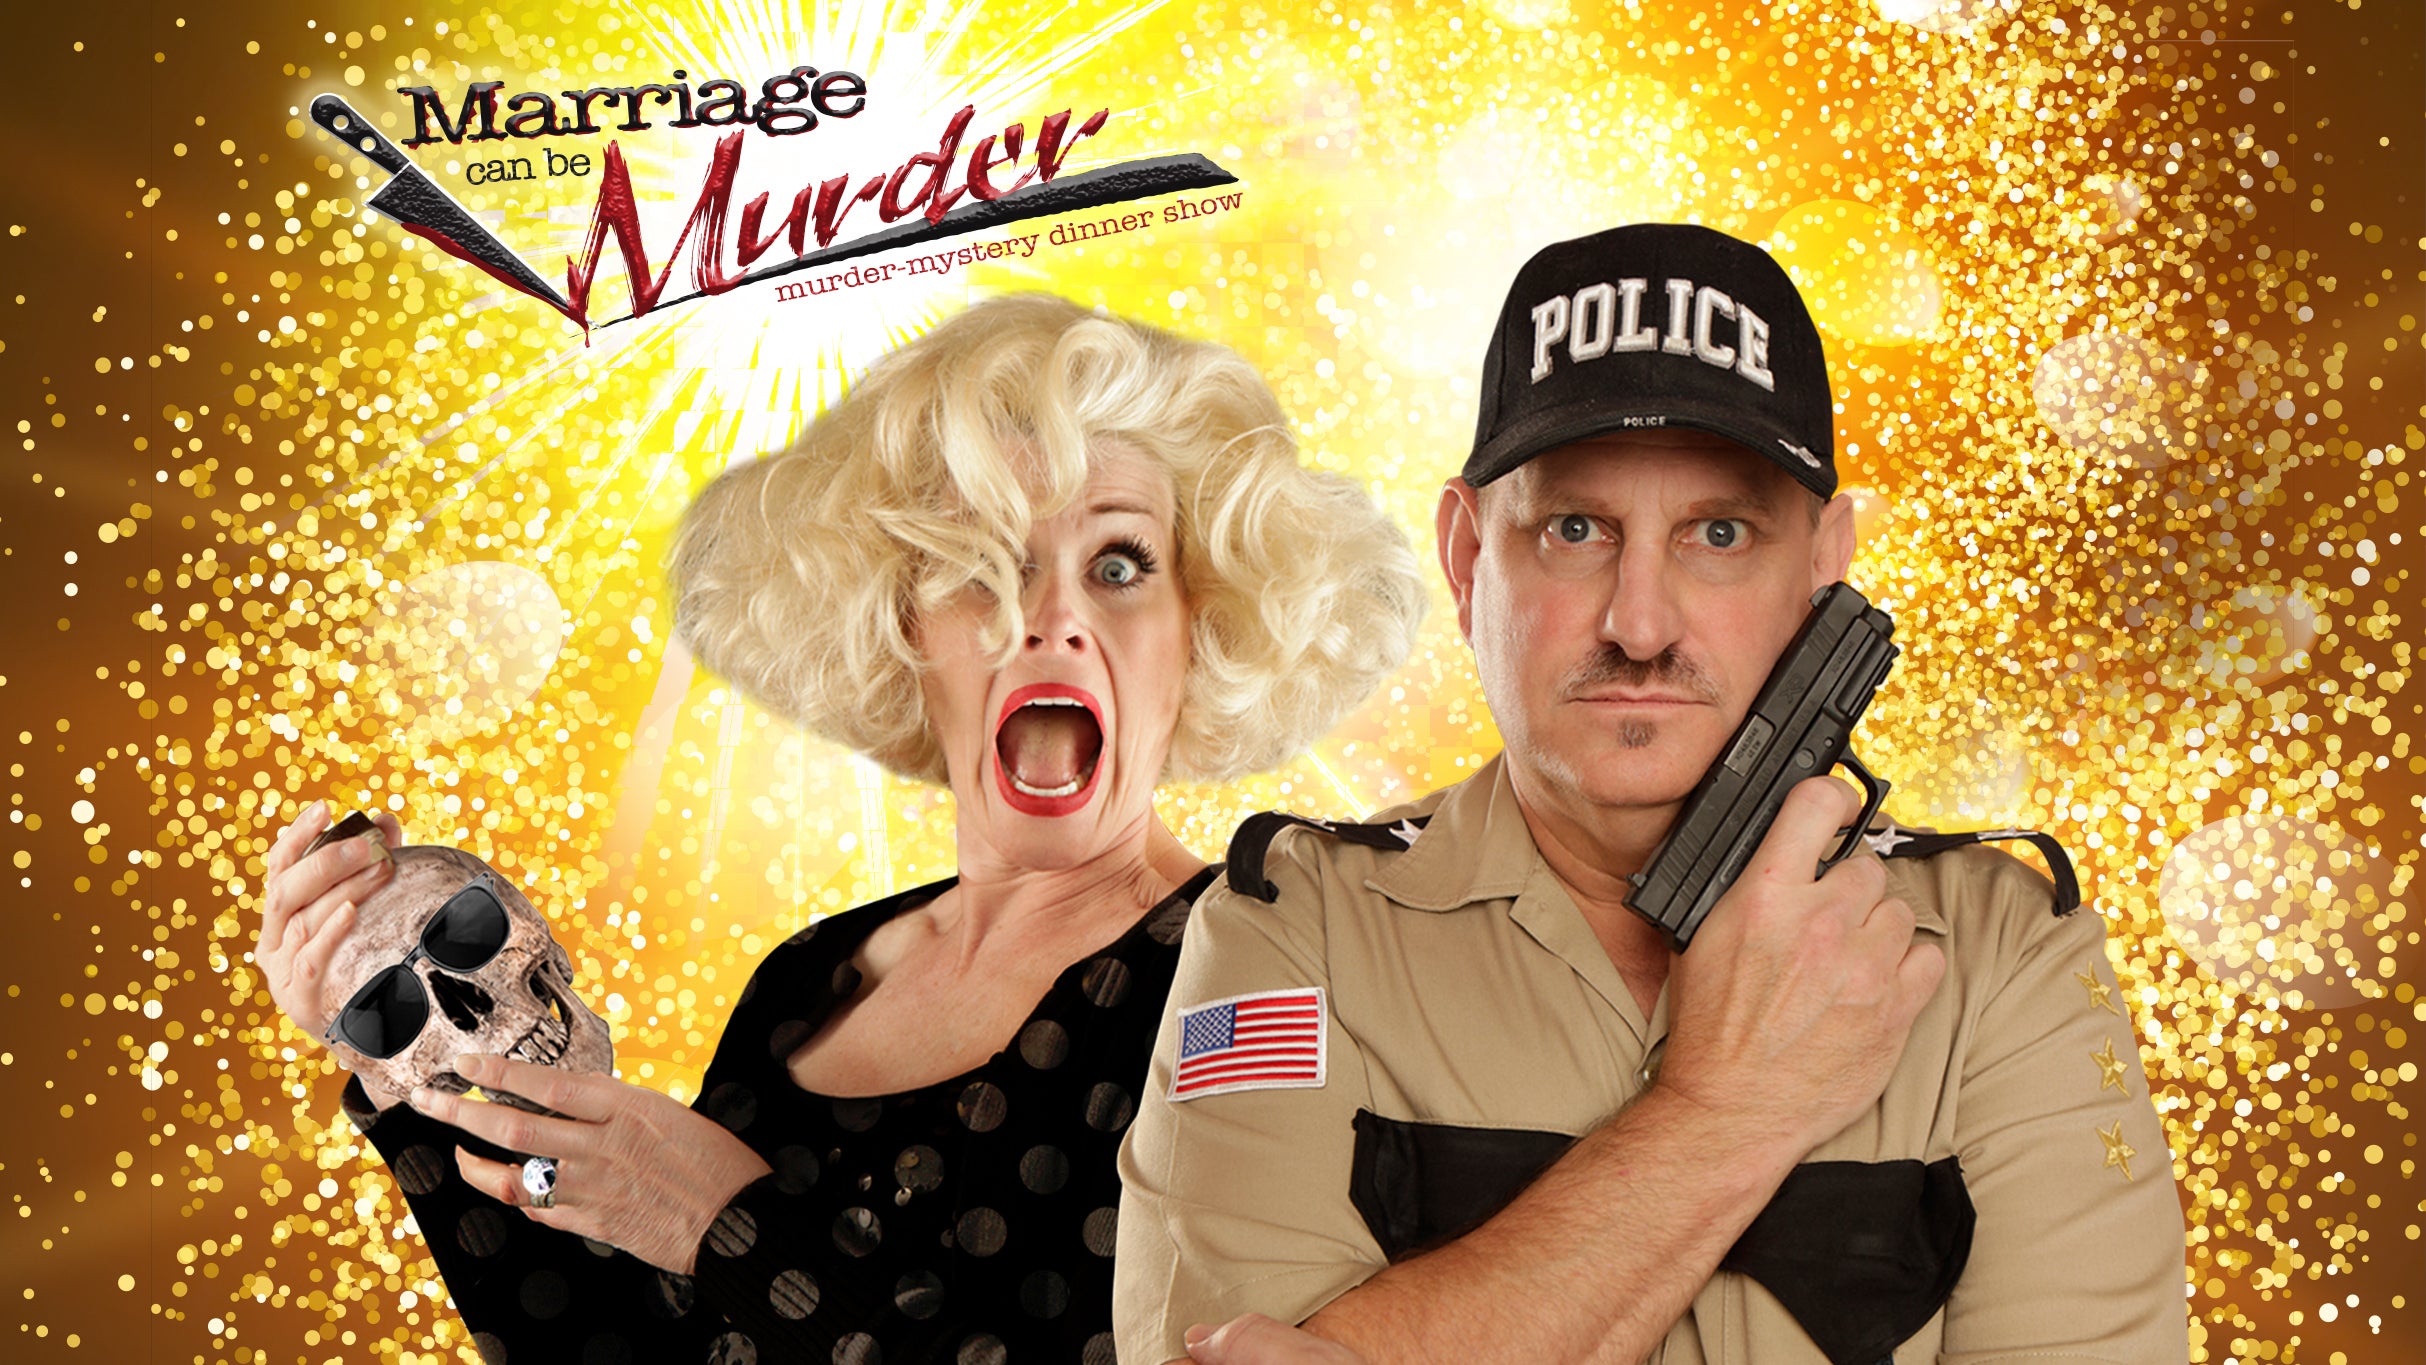 Marriage can be Murder at The Orleans Hotel and Casino – Las Vegas, NV